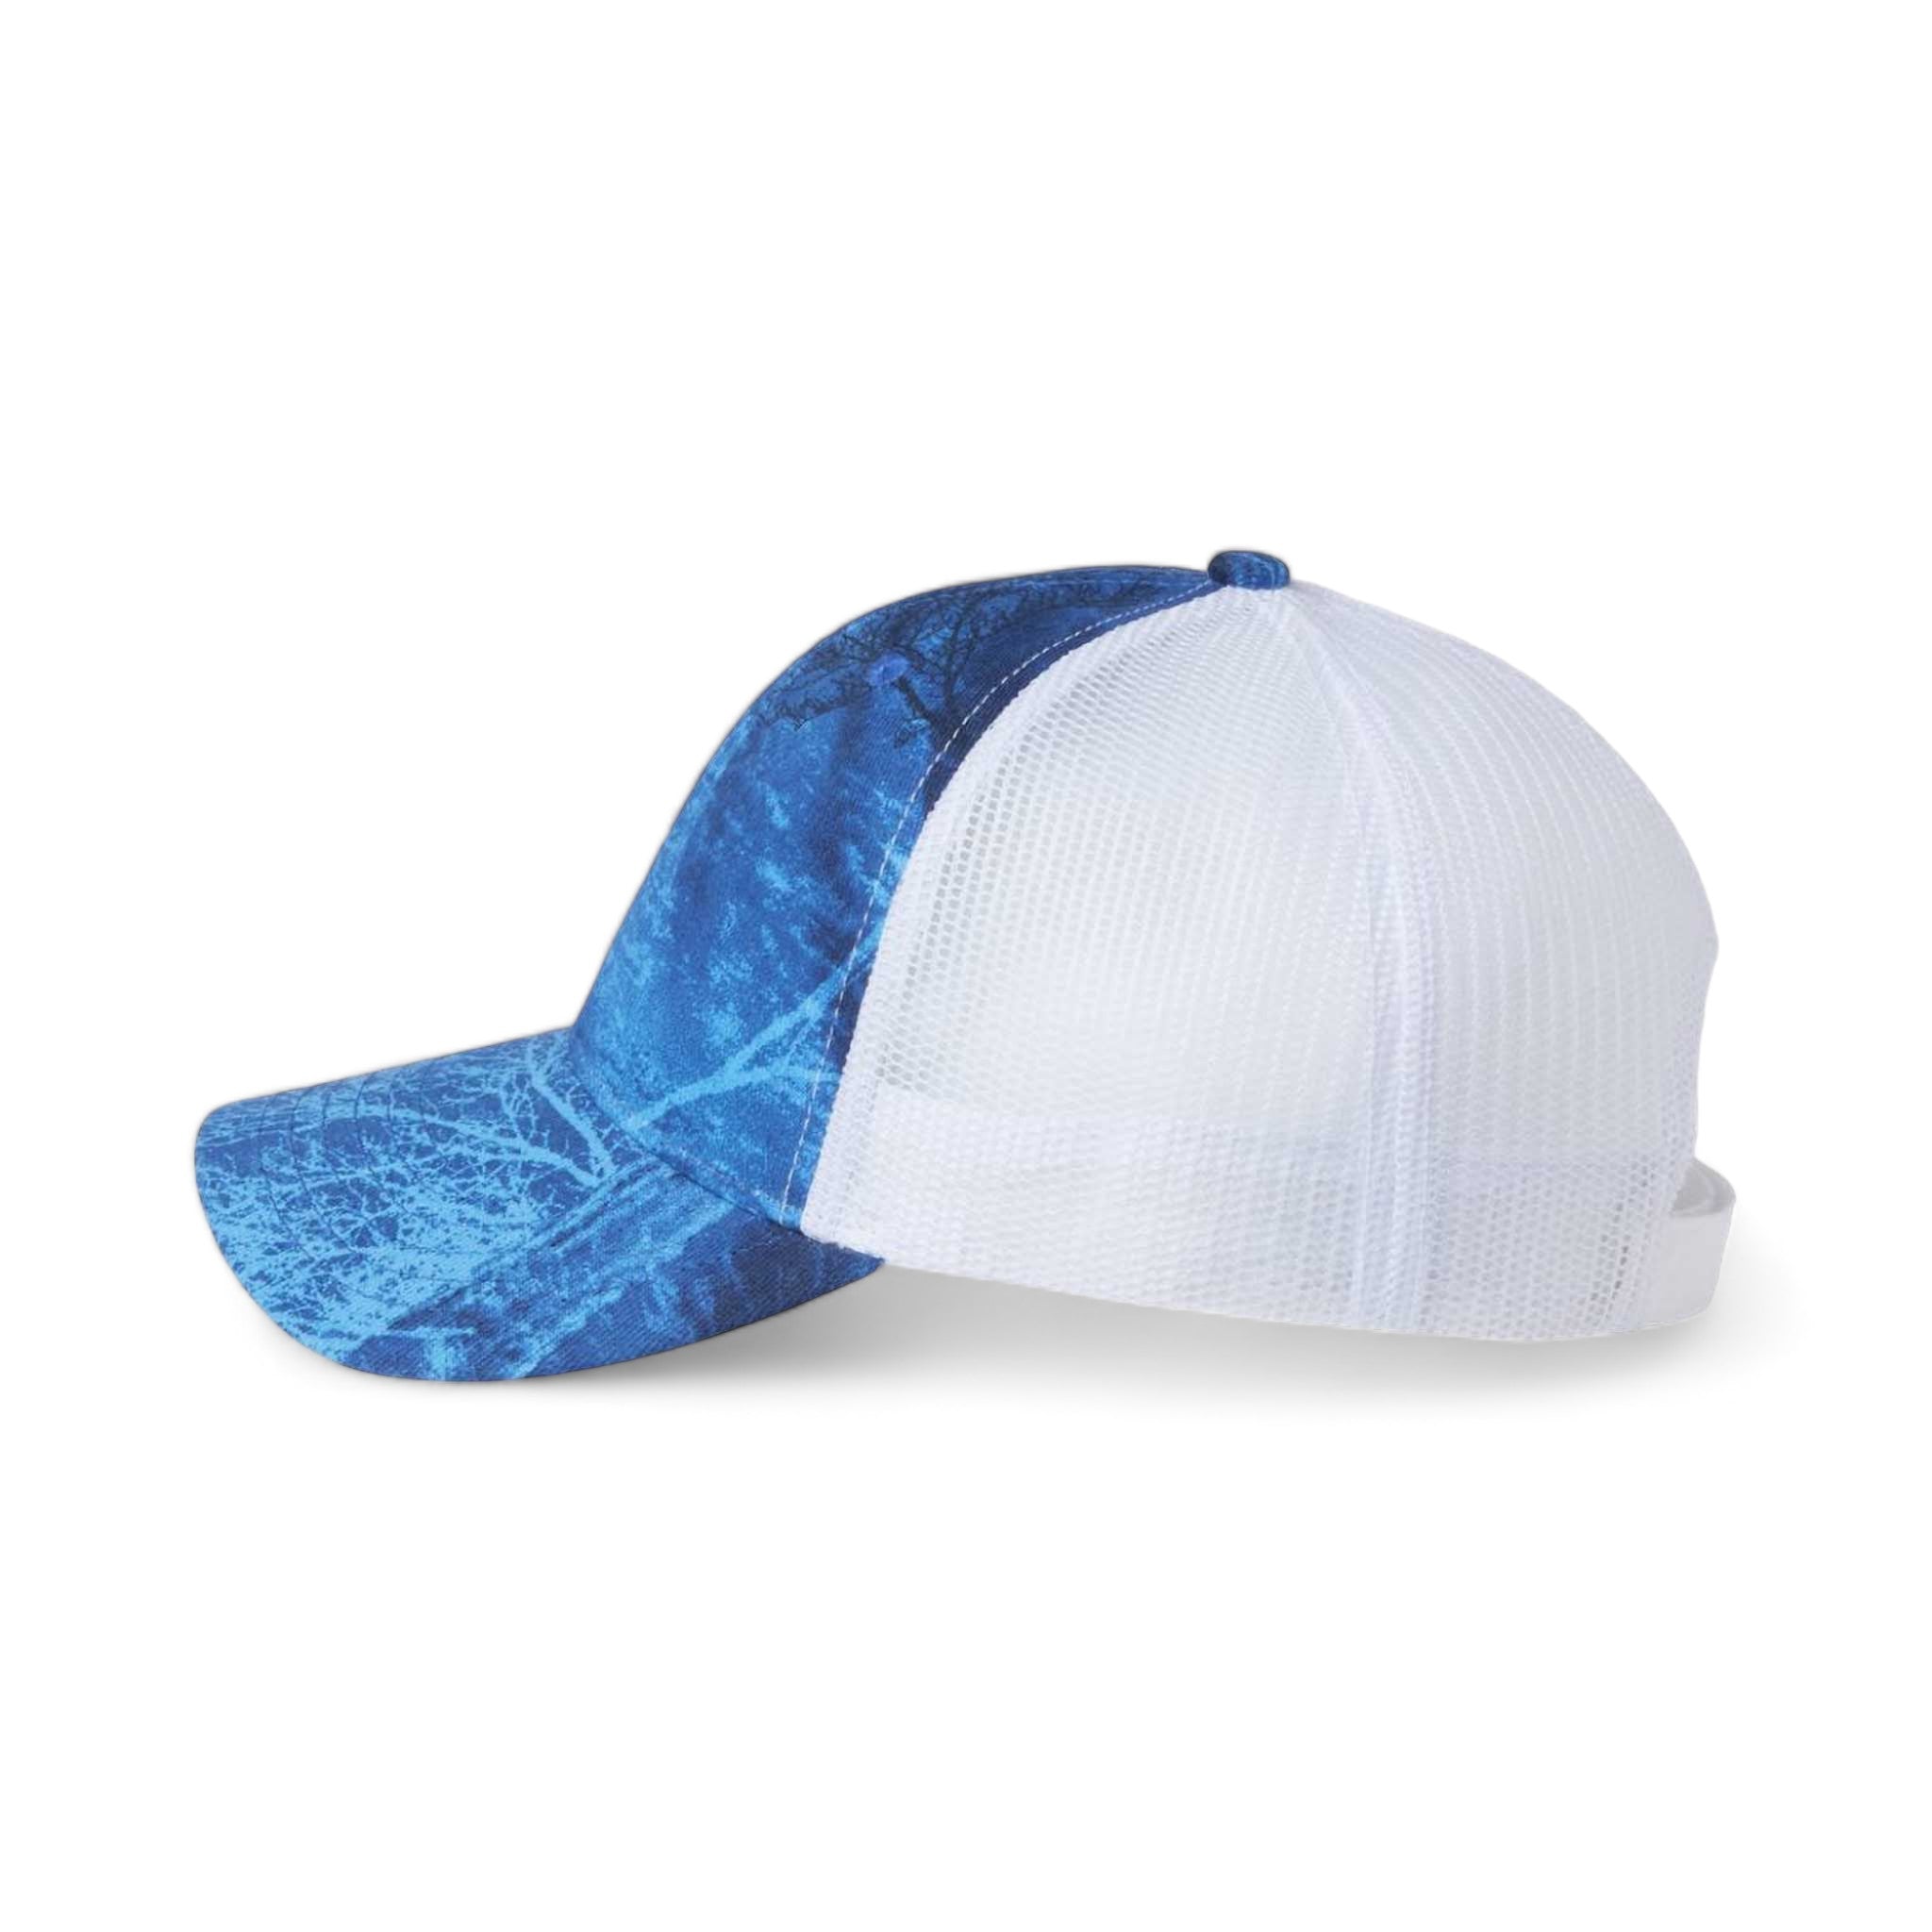 Side view of Kati LC5M custom hat in realtree fishing blue and white